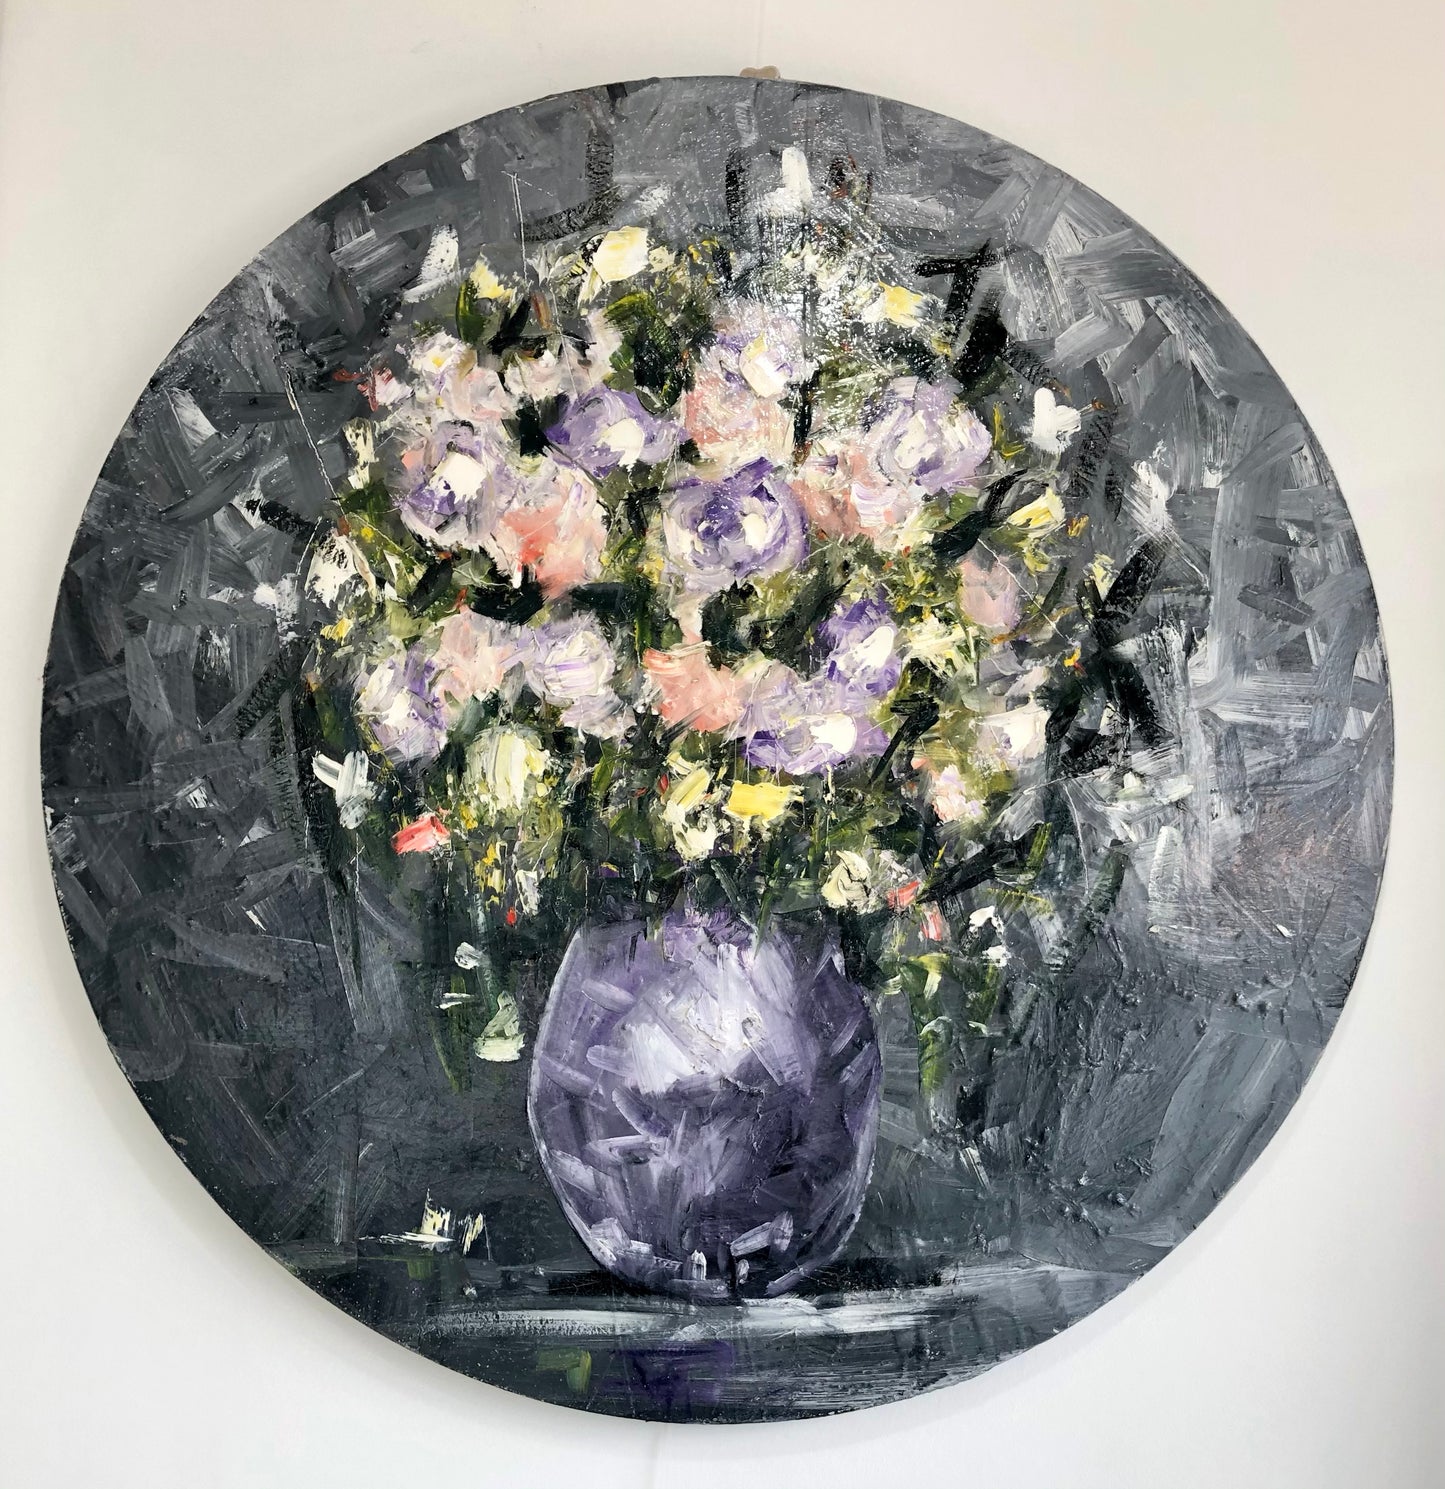 Bouquet No. 2 by Moses Salihou - SOLD